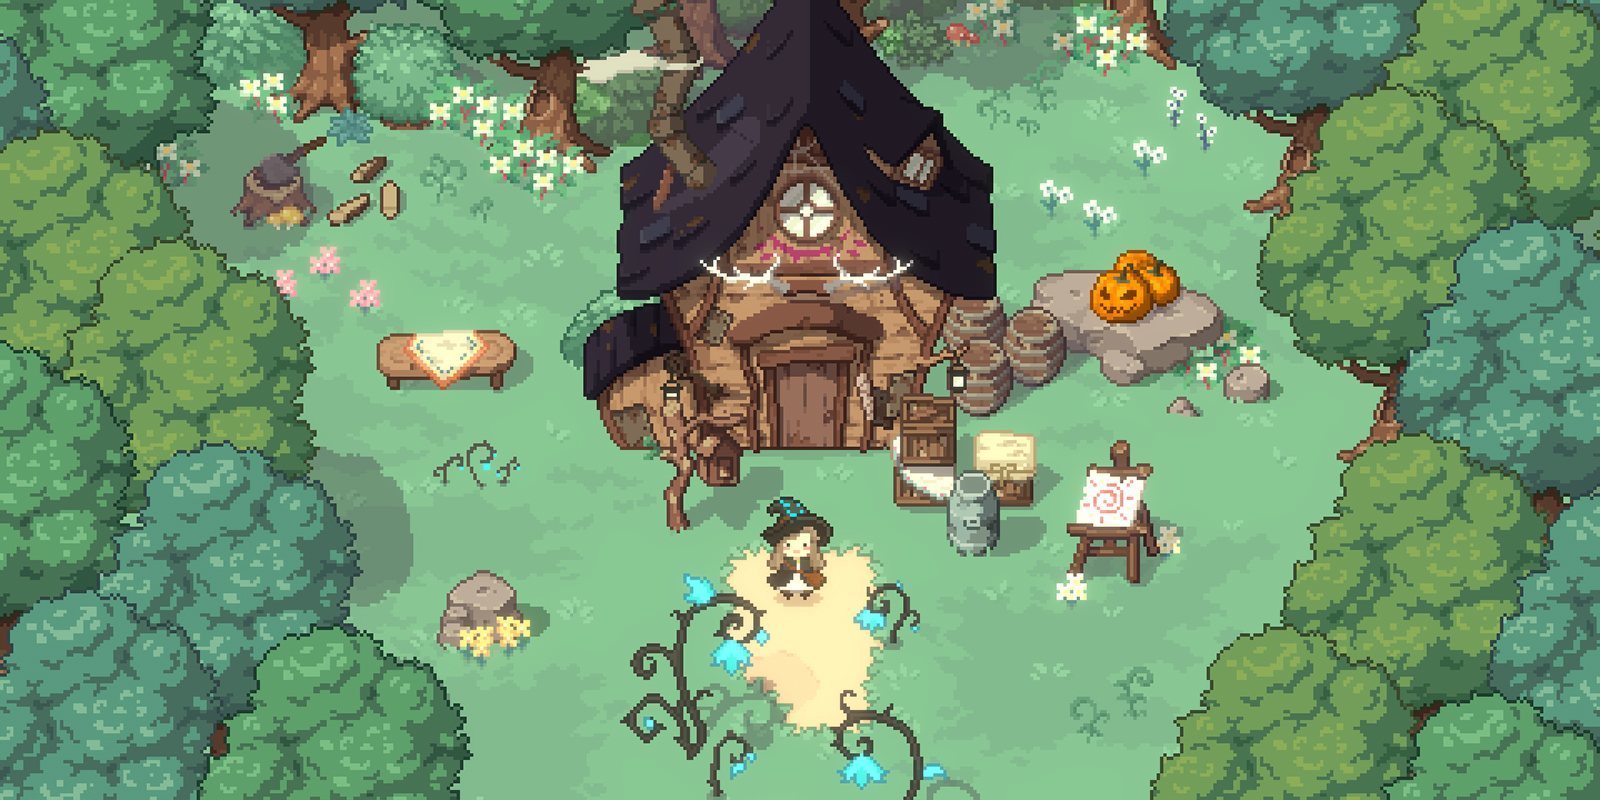 for mac download Little Witch in the Woods